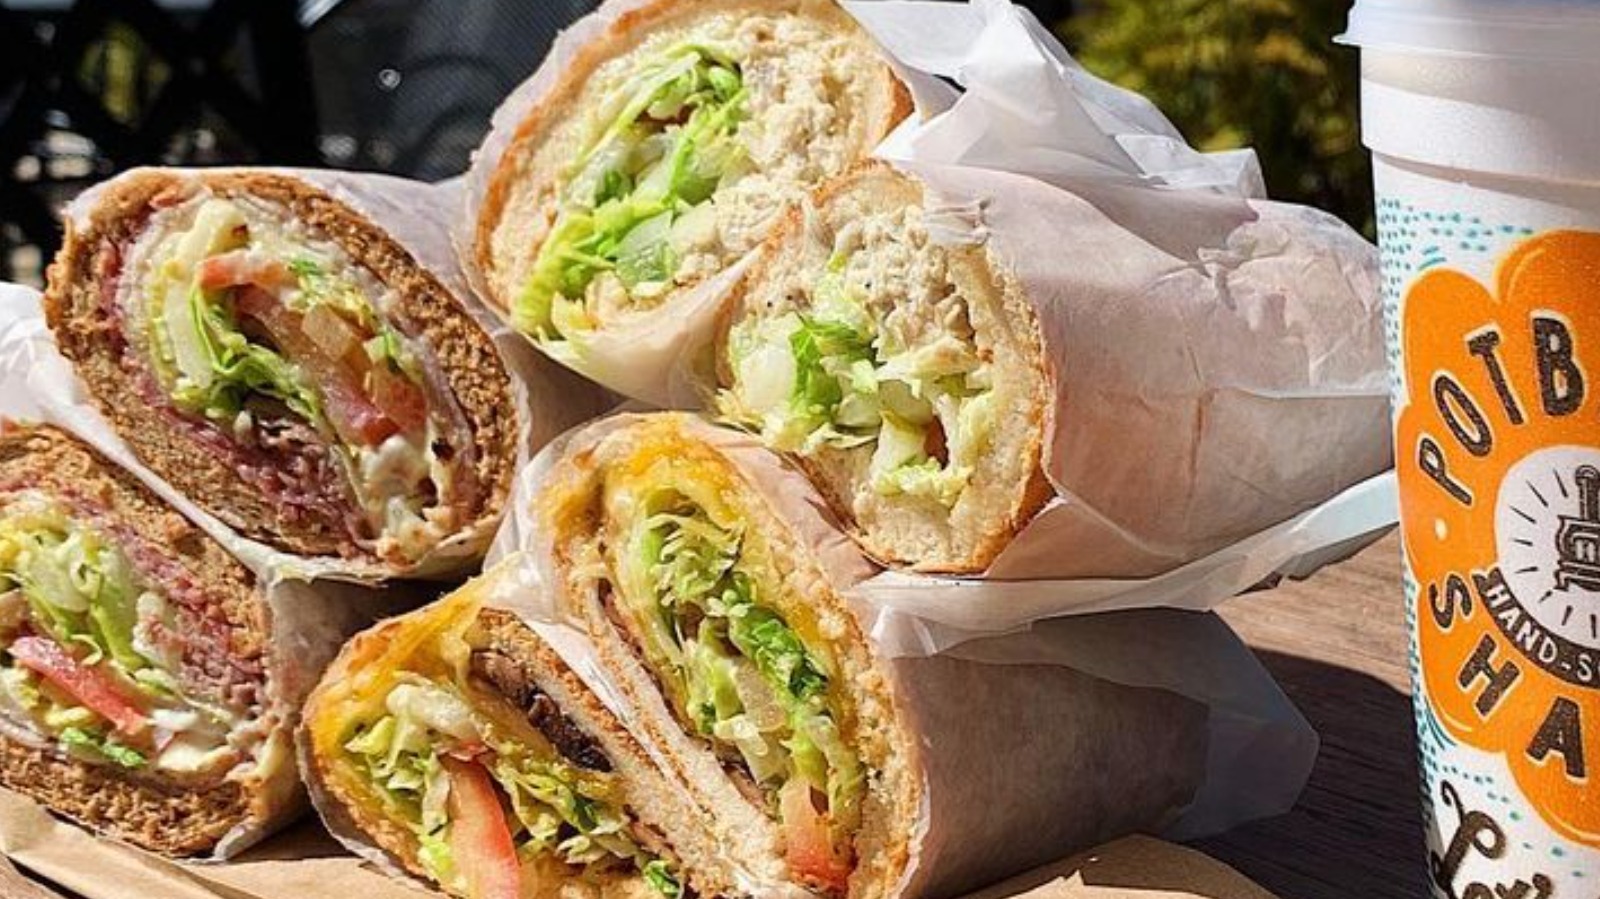 https://www.mashed.com/img/gallery/potbelly-sandwich-shop-sandwiches-ranked-from-worst-to-best/l-intro-1663548180.jpg